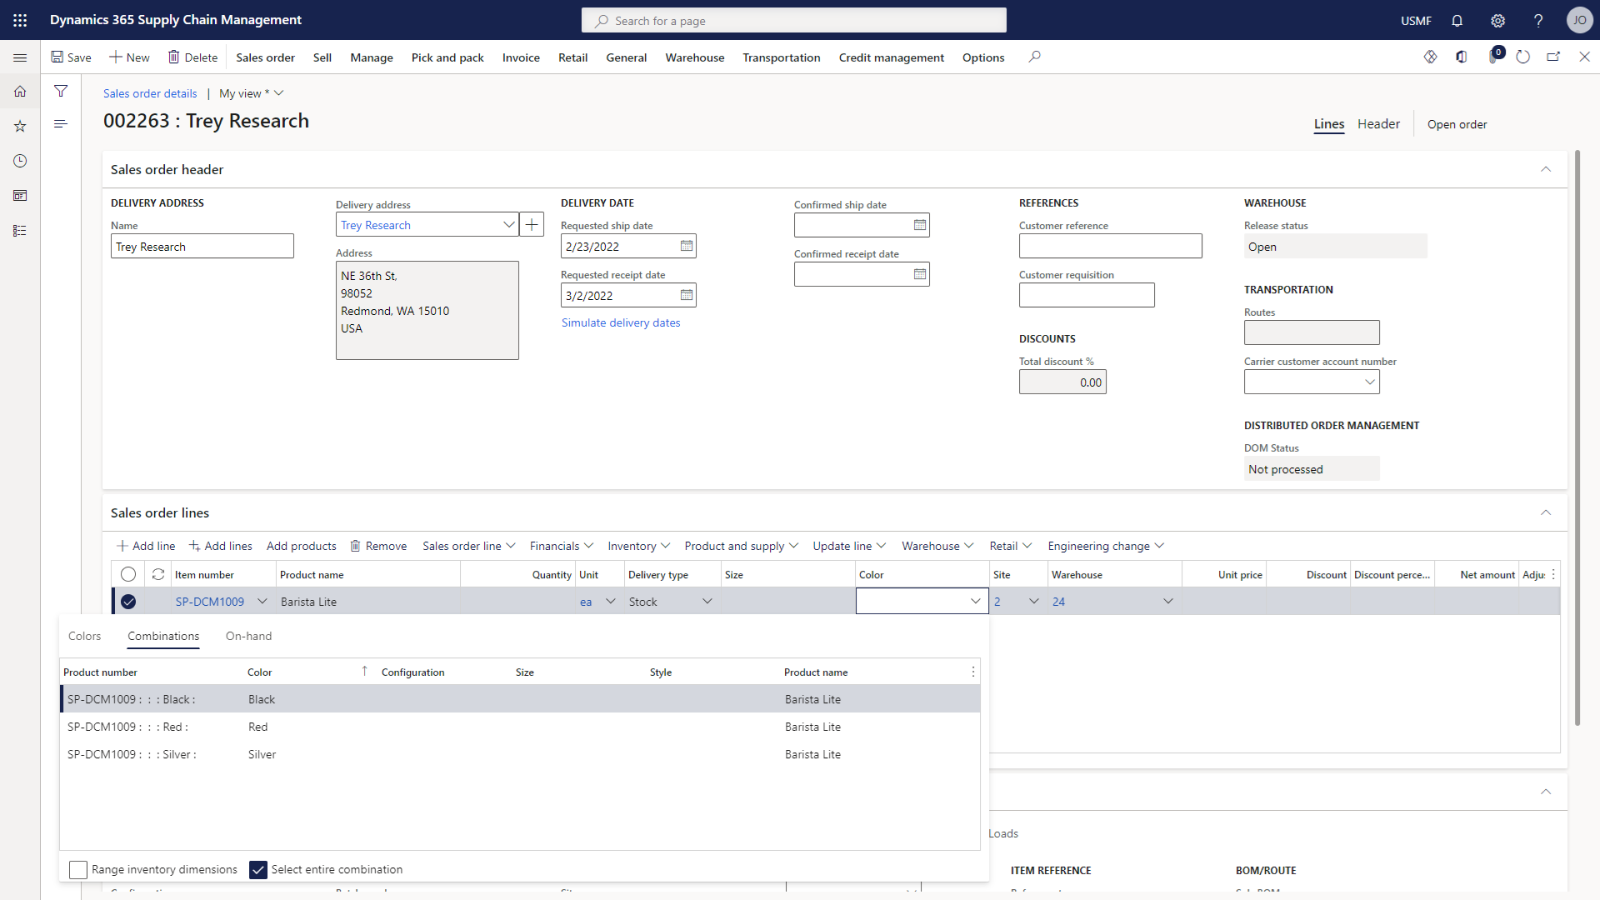 Dynamics 365 Supply Chain Management sales order configuration